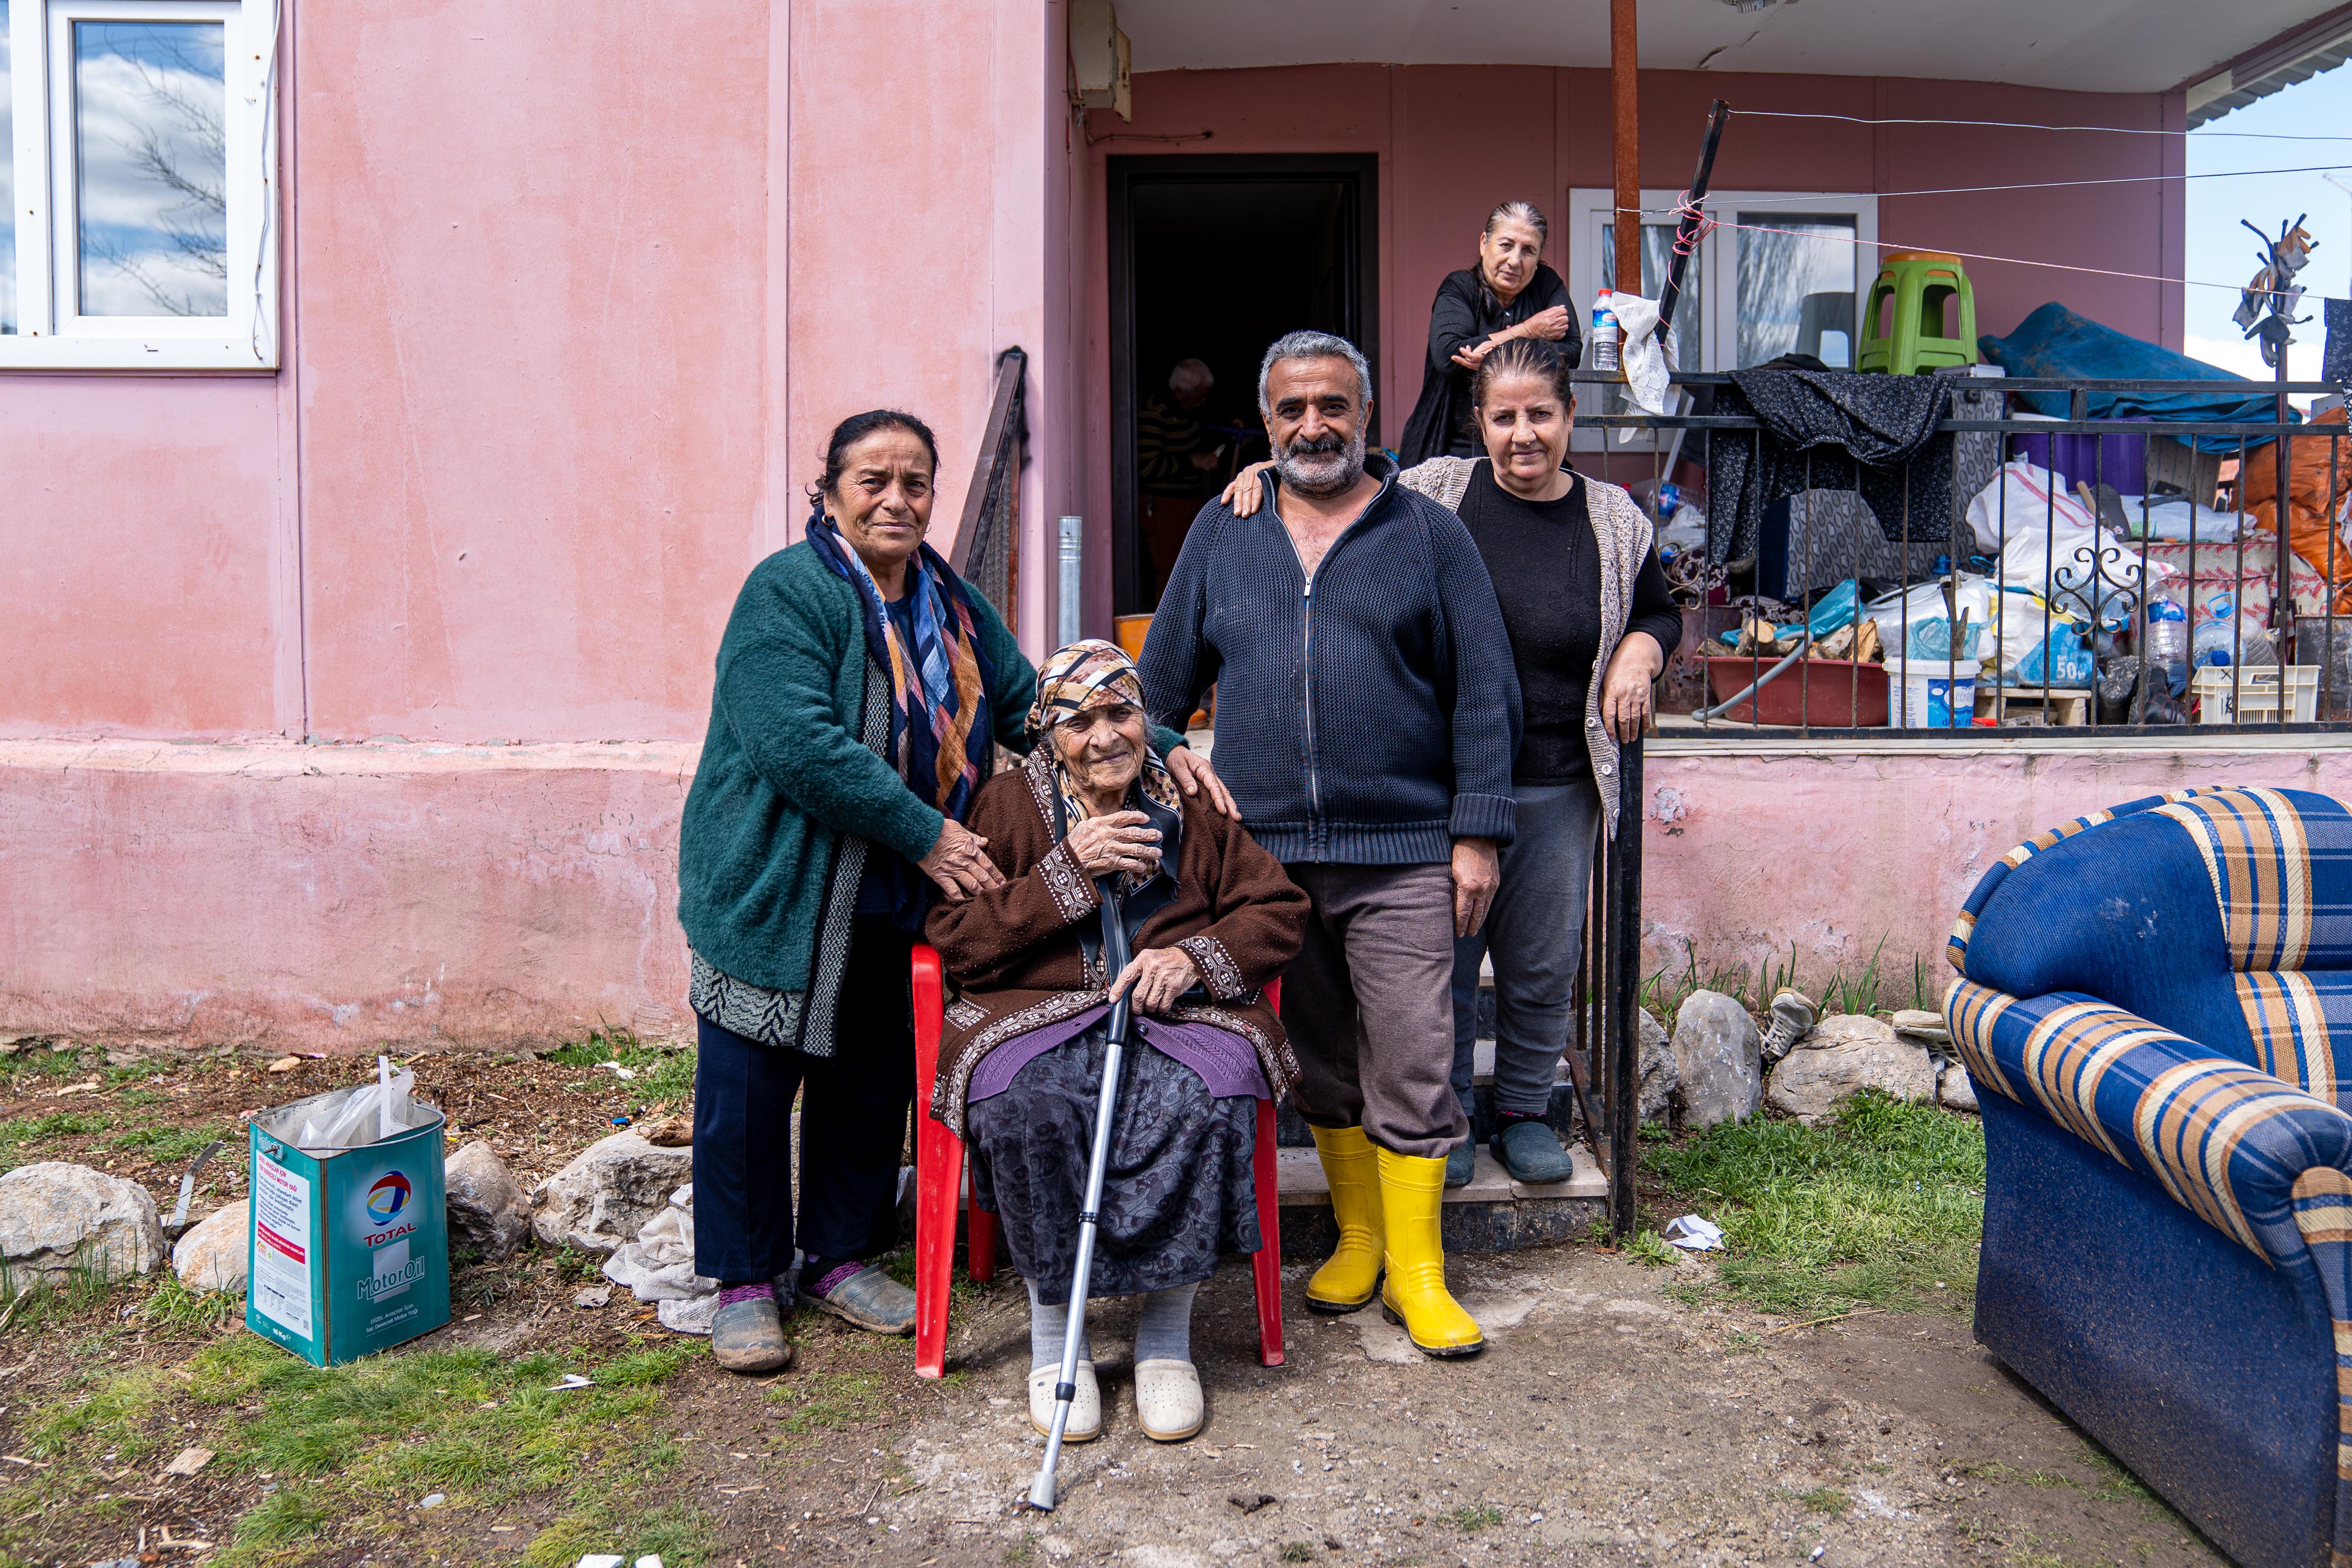 Mental Health support for people affected by the earthquakes in Türkiye